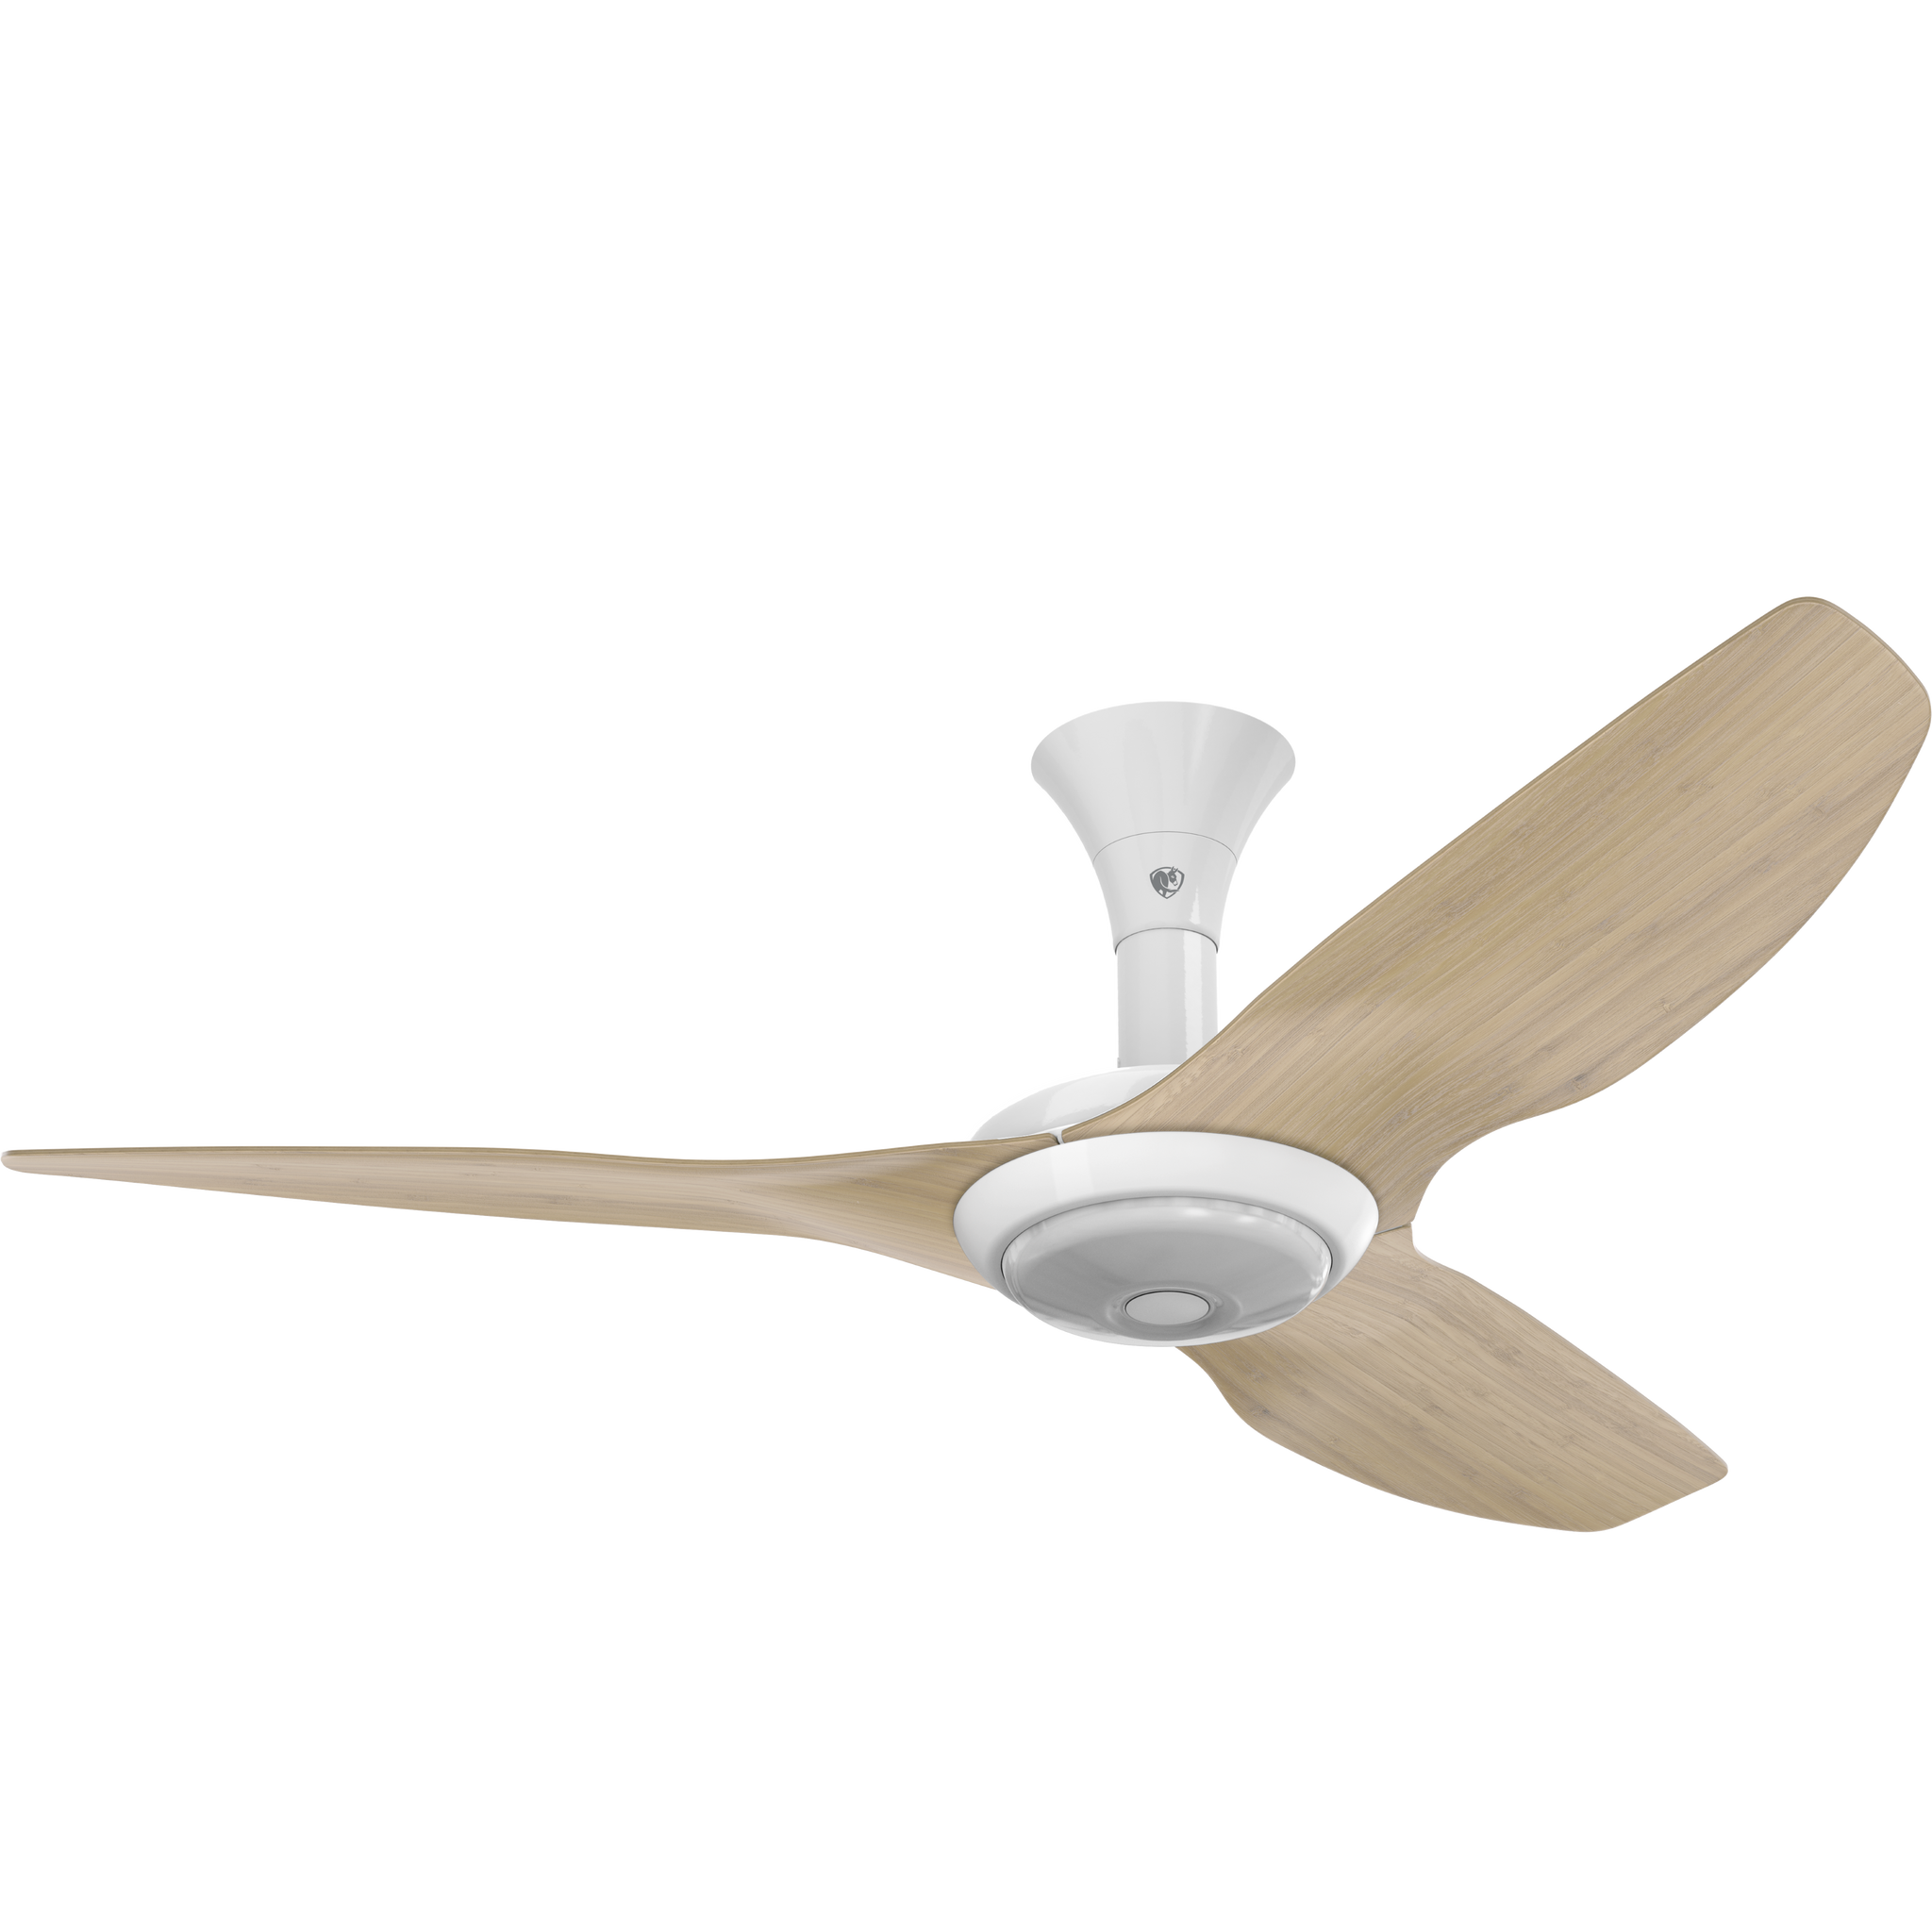 Big Ass Fans Haiku 52" Ceiling Fan, Low Profile Mount with Natural Bamboo Blades and White Finish with LED